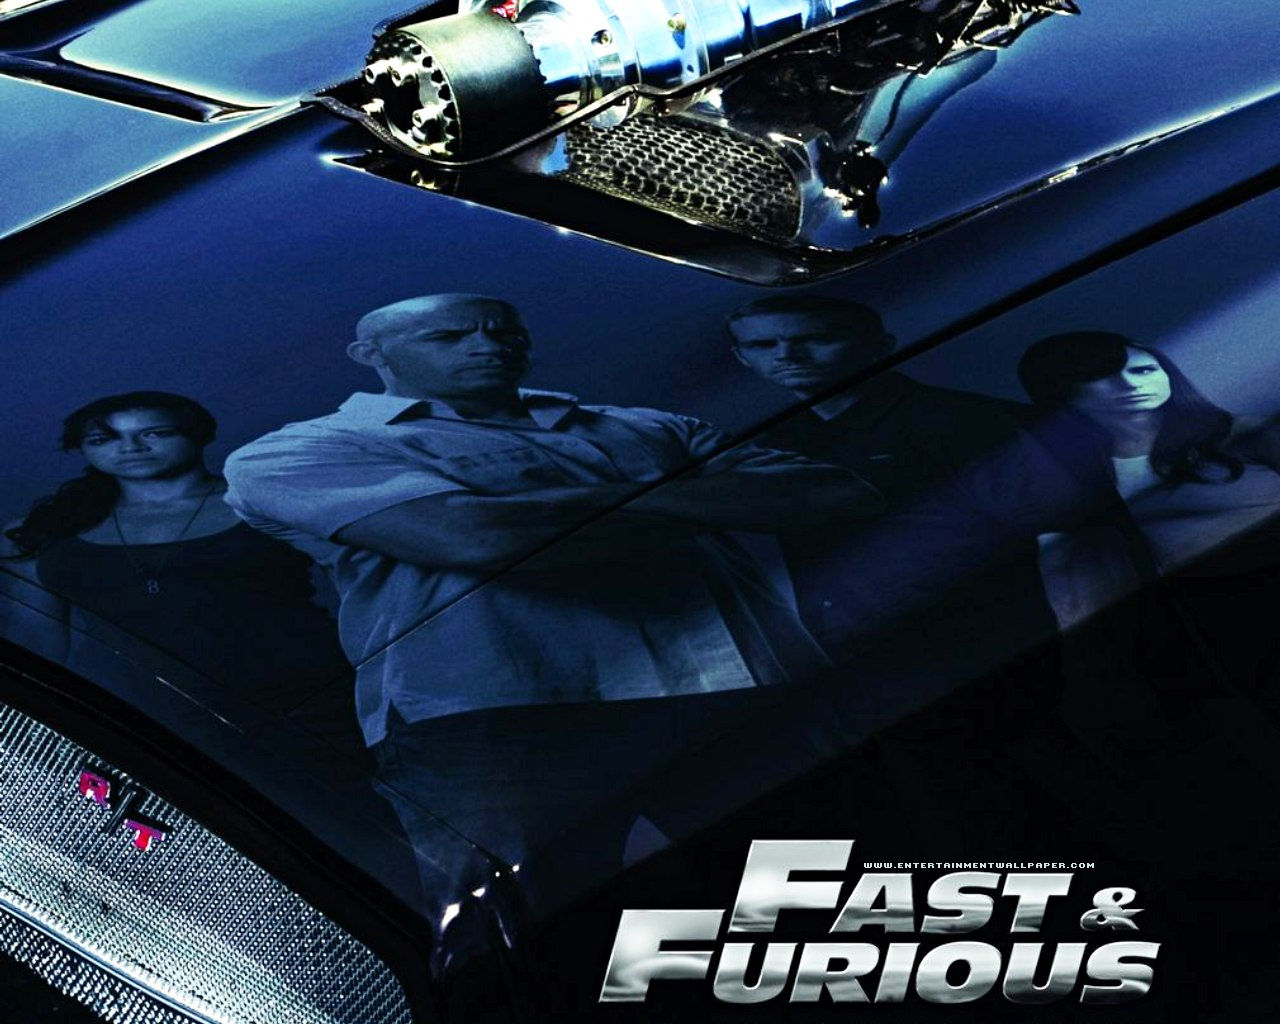 http://www.houyhnhnm.jp/blog/moriyama/images/jedi_The_Fast_and_the_Furious_4.jpg